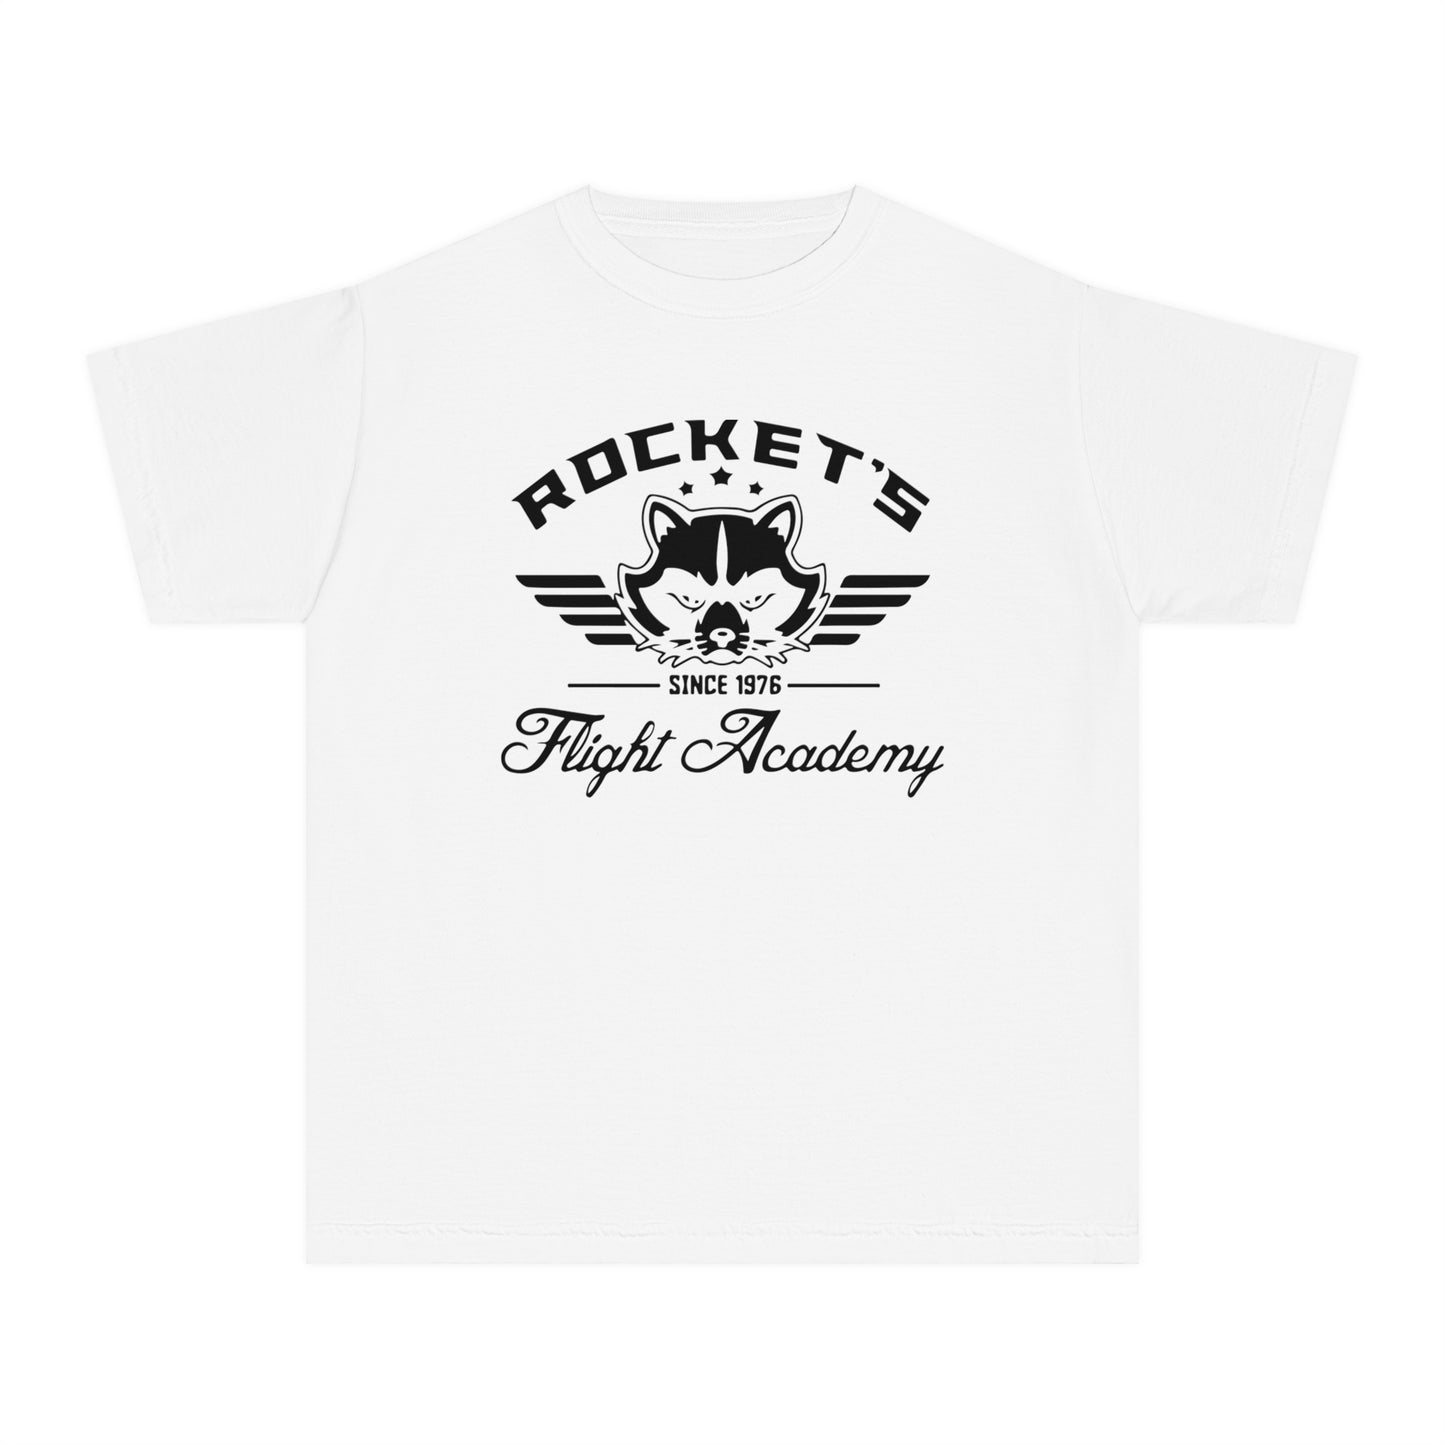 Rocket's Flight Academy Comfort Colors Youth Midweight Tee